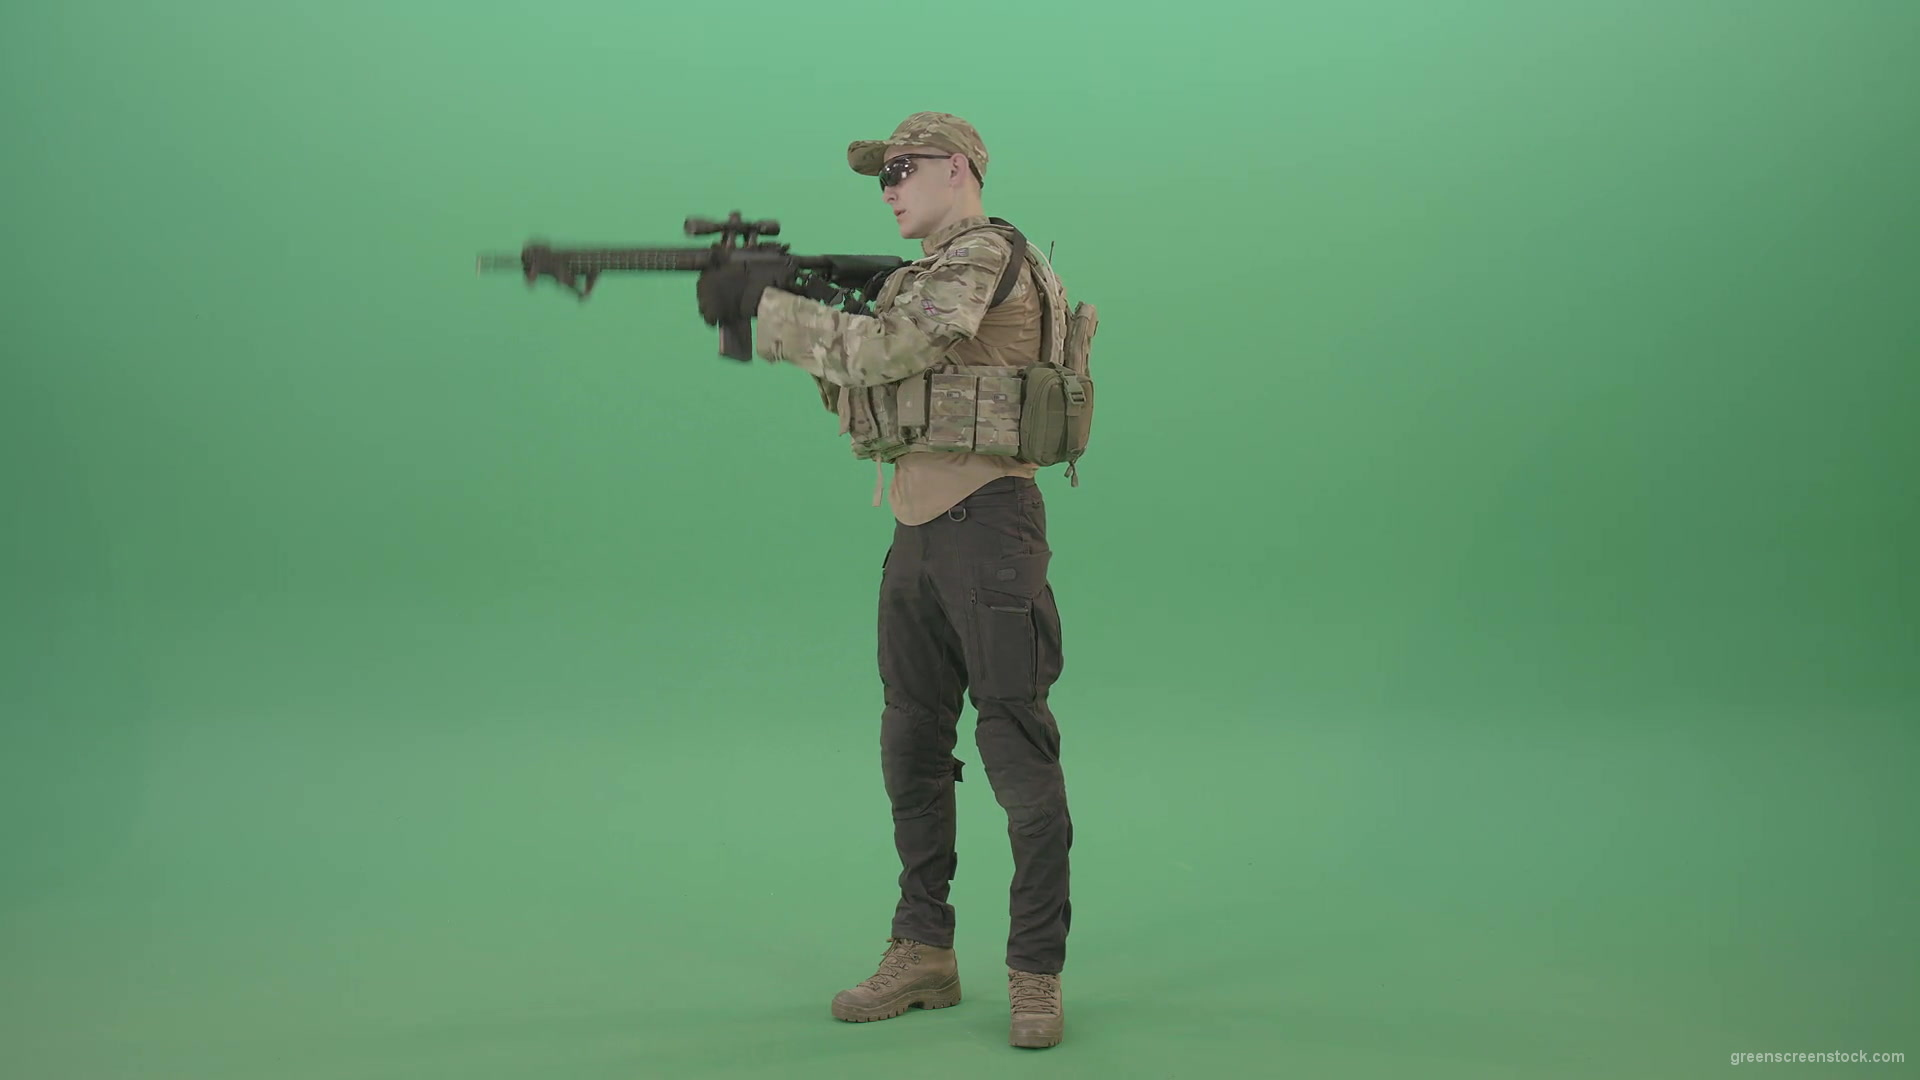 Counter-strike-army-police-man-shooting-enemy-from-machine-gun-in-Camouflage-uniform-on-green-screen-4K-Video-Footage-1920_002 Green Screen Stock